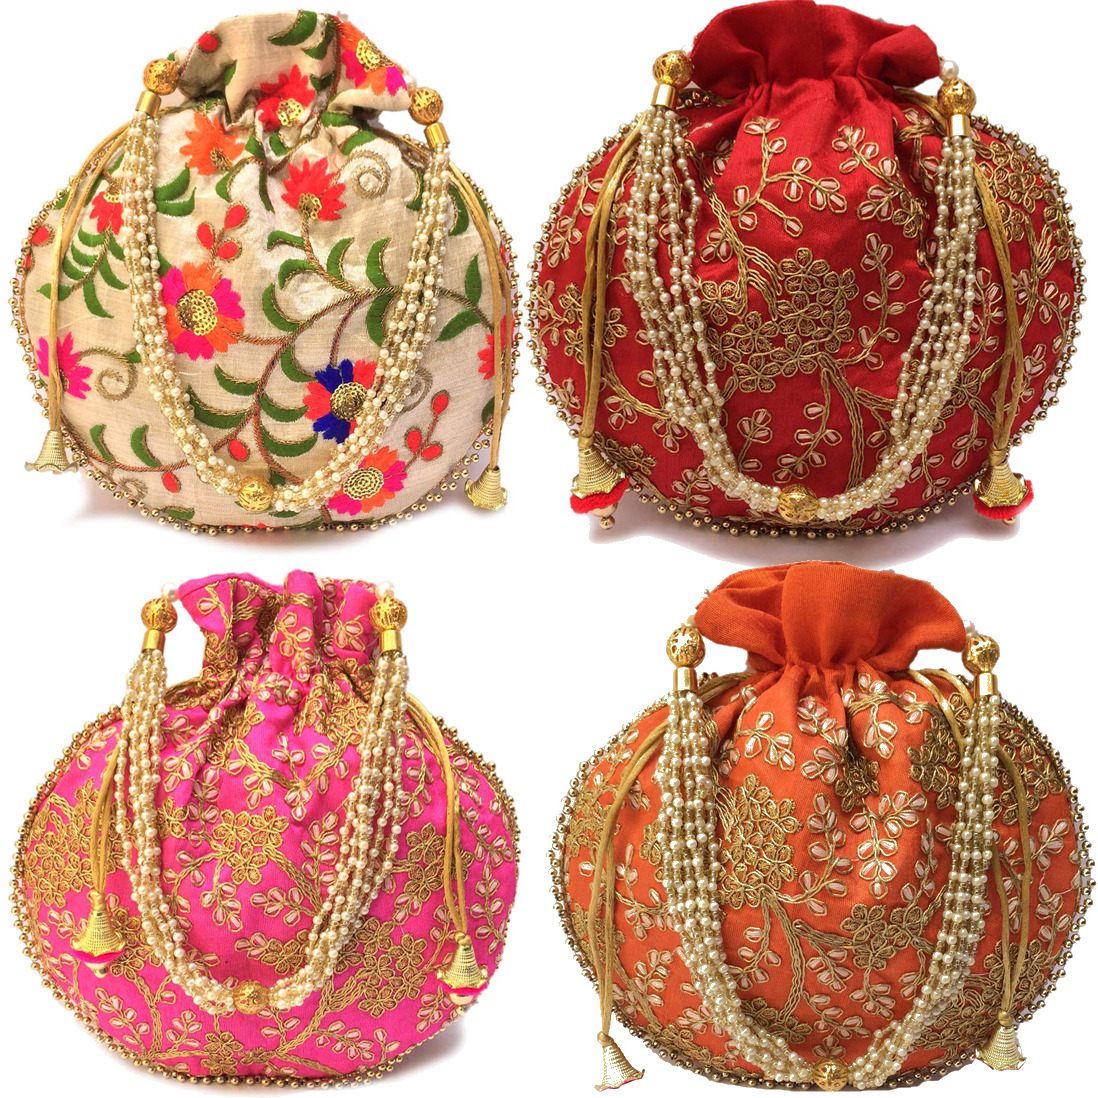 Buy Online Lot Of 100 Indian Handmade Women's Embroidered Clutch